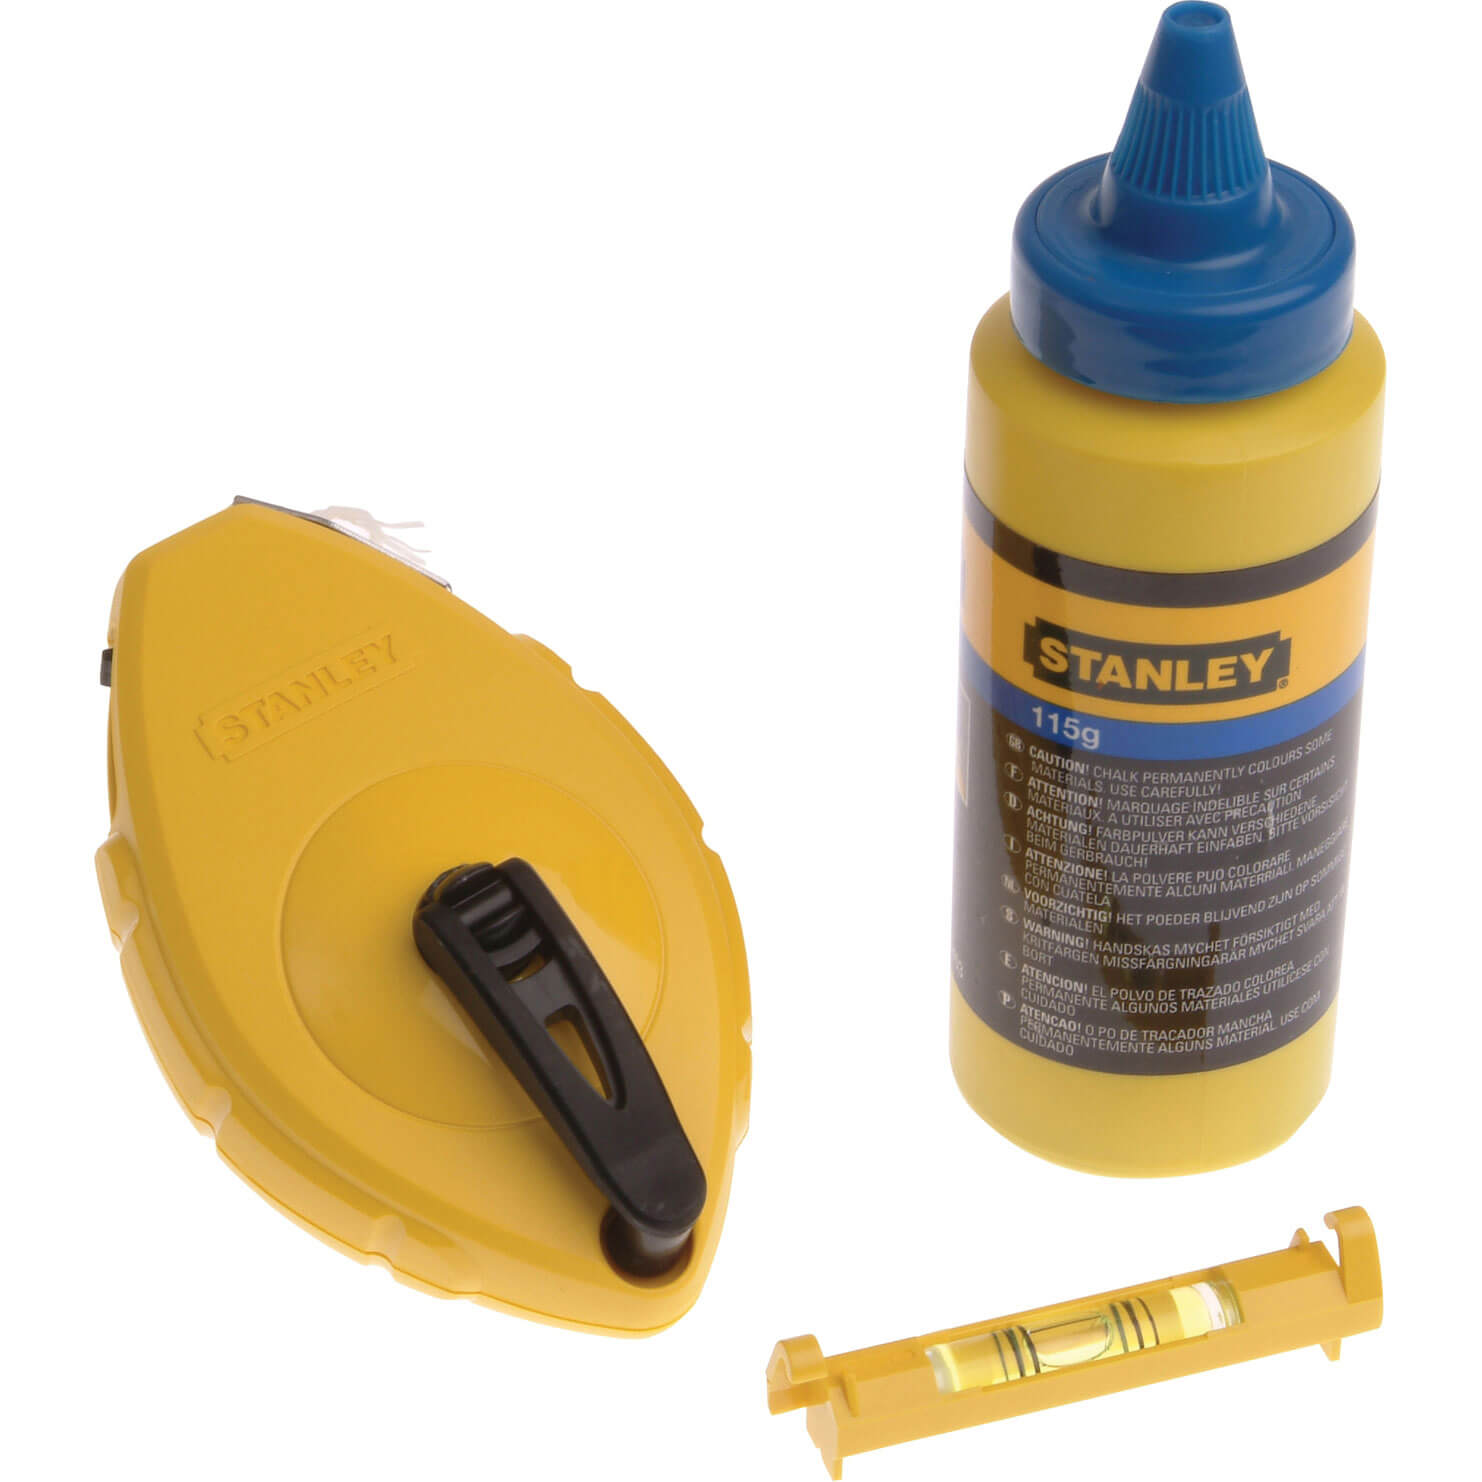 Image of Stanley Chalk Line Reel, Chalk Refill and Level 30m